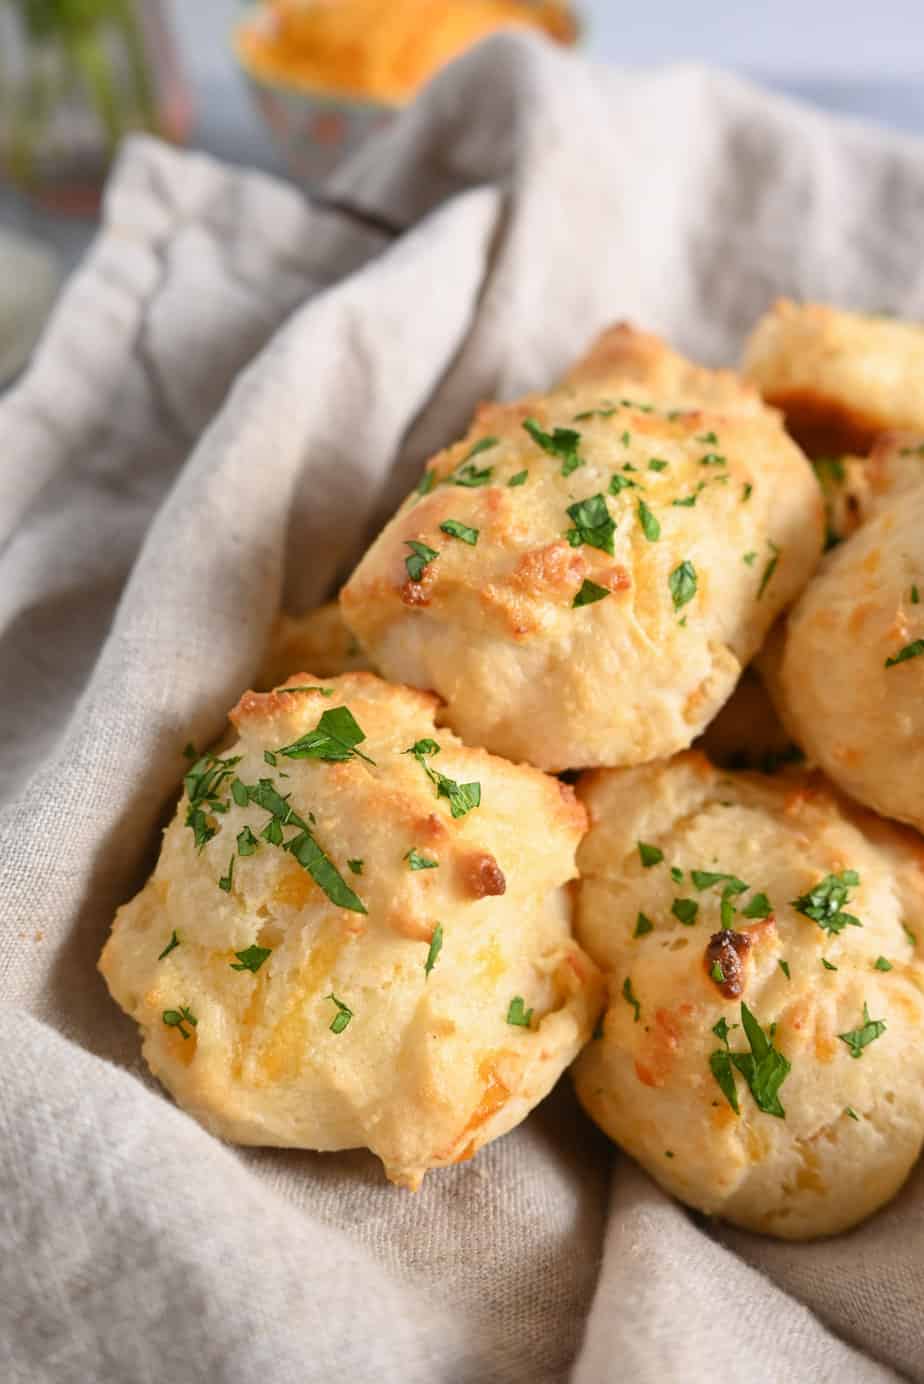 How To Cook: Red Lobster Cheddar Bay Biscuit Mix 